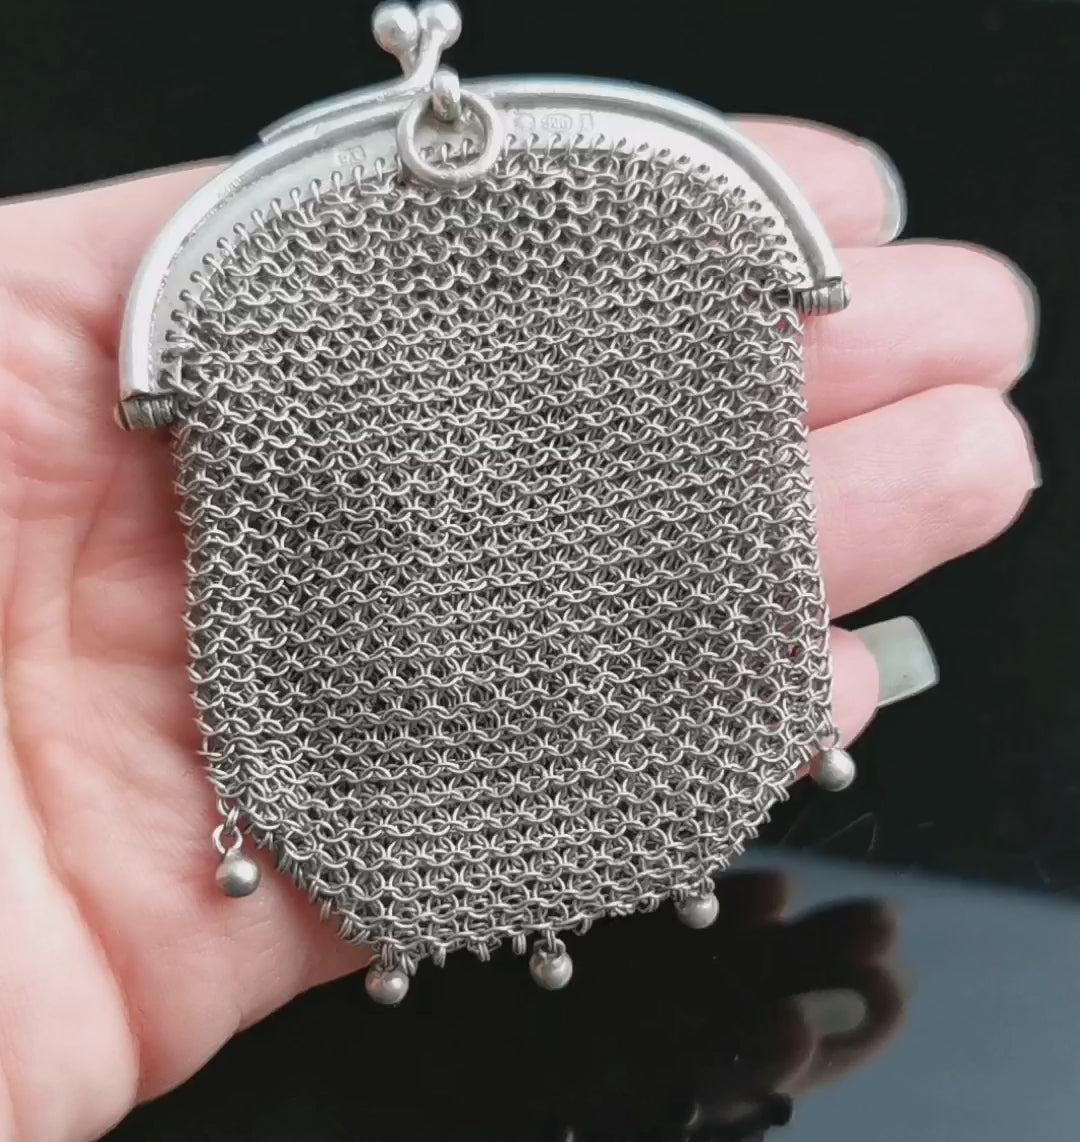 Gent's Mesh Coin Purse - Ourivesaria Âncora ® - Jewellery of Pre-Owned Gold  - Porto